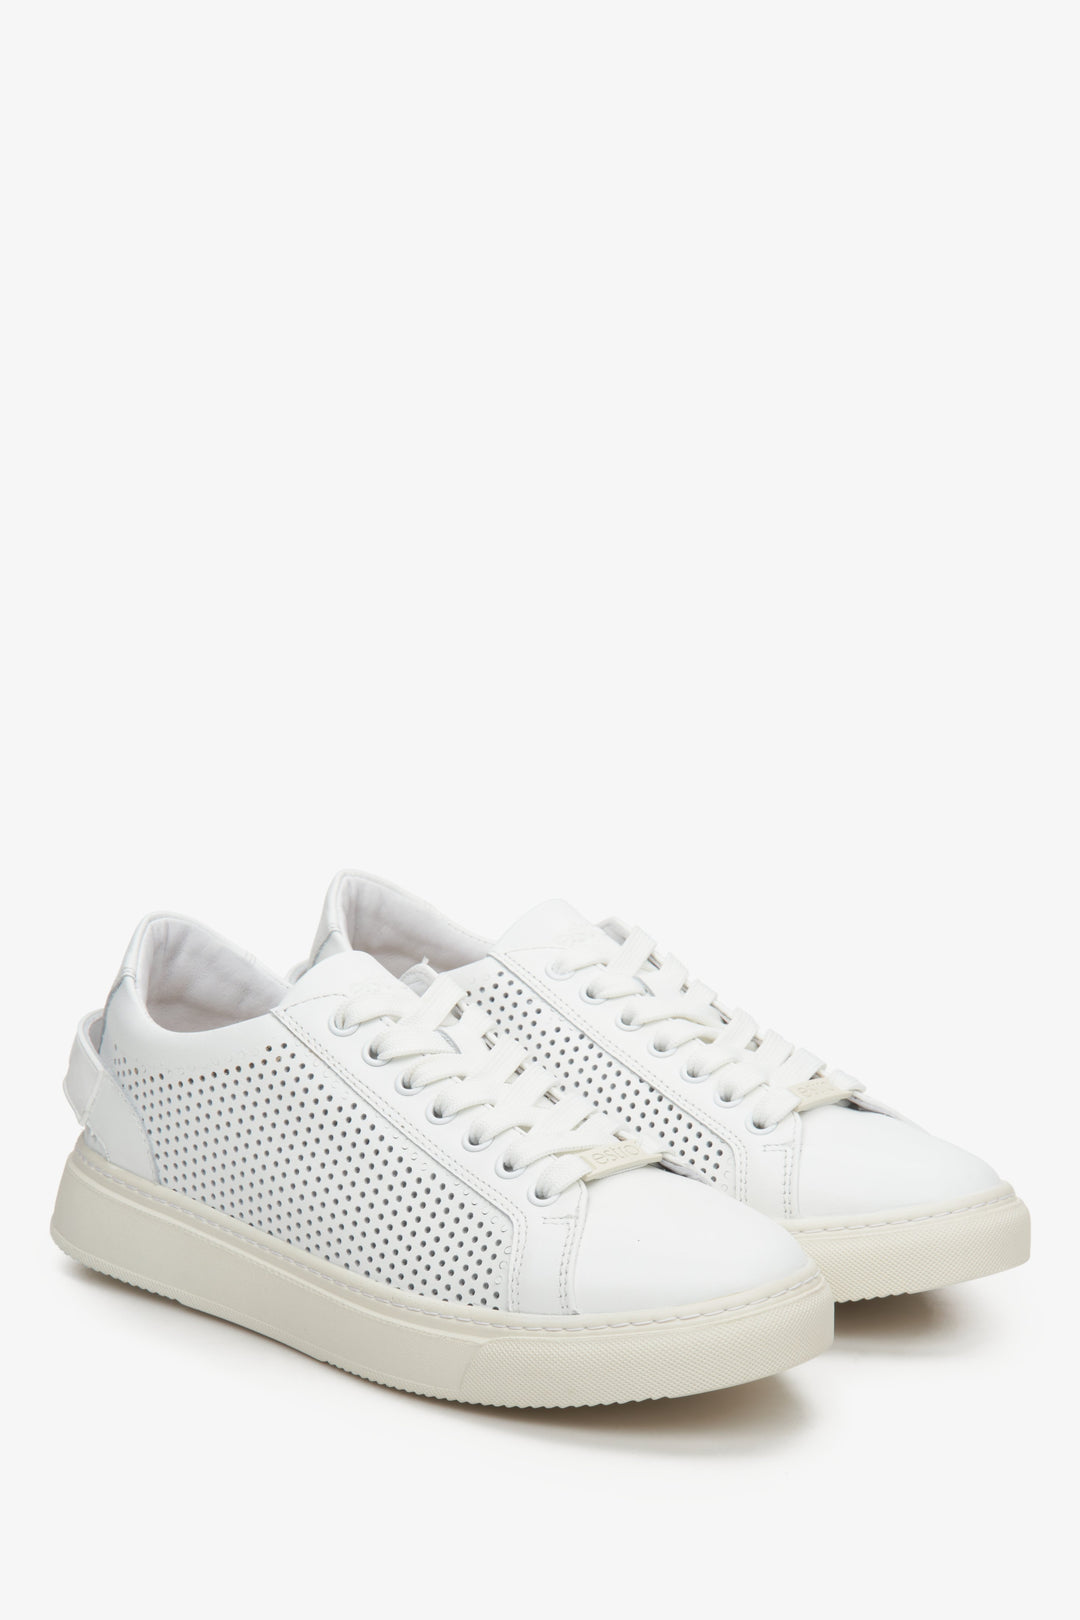 Women's white leather Estro sneakers with perforation for fall/spring.